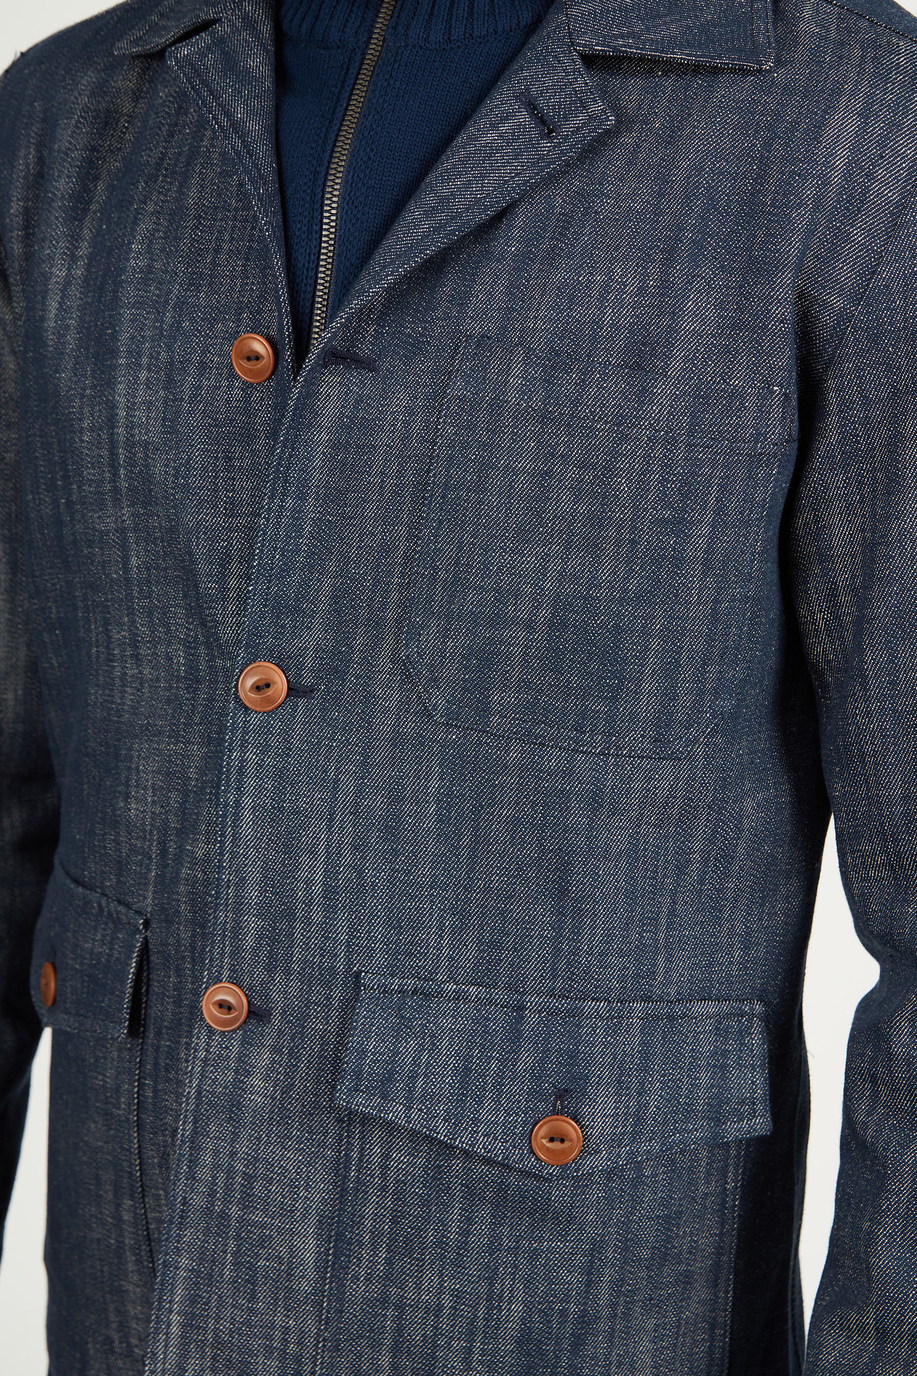 Men's Sahariana jacket in 100% cotton, regular fit model - Outerwear and Jackets | La Martina - Official Online Shop